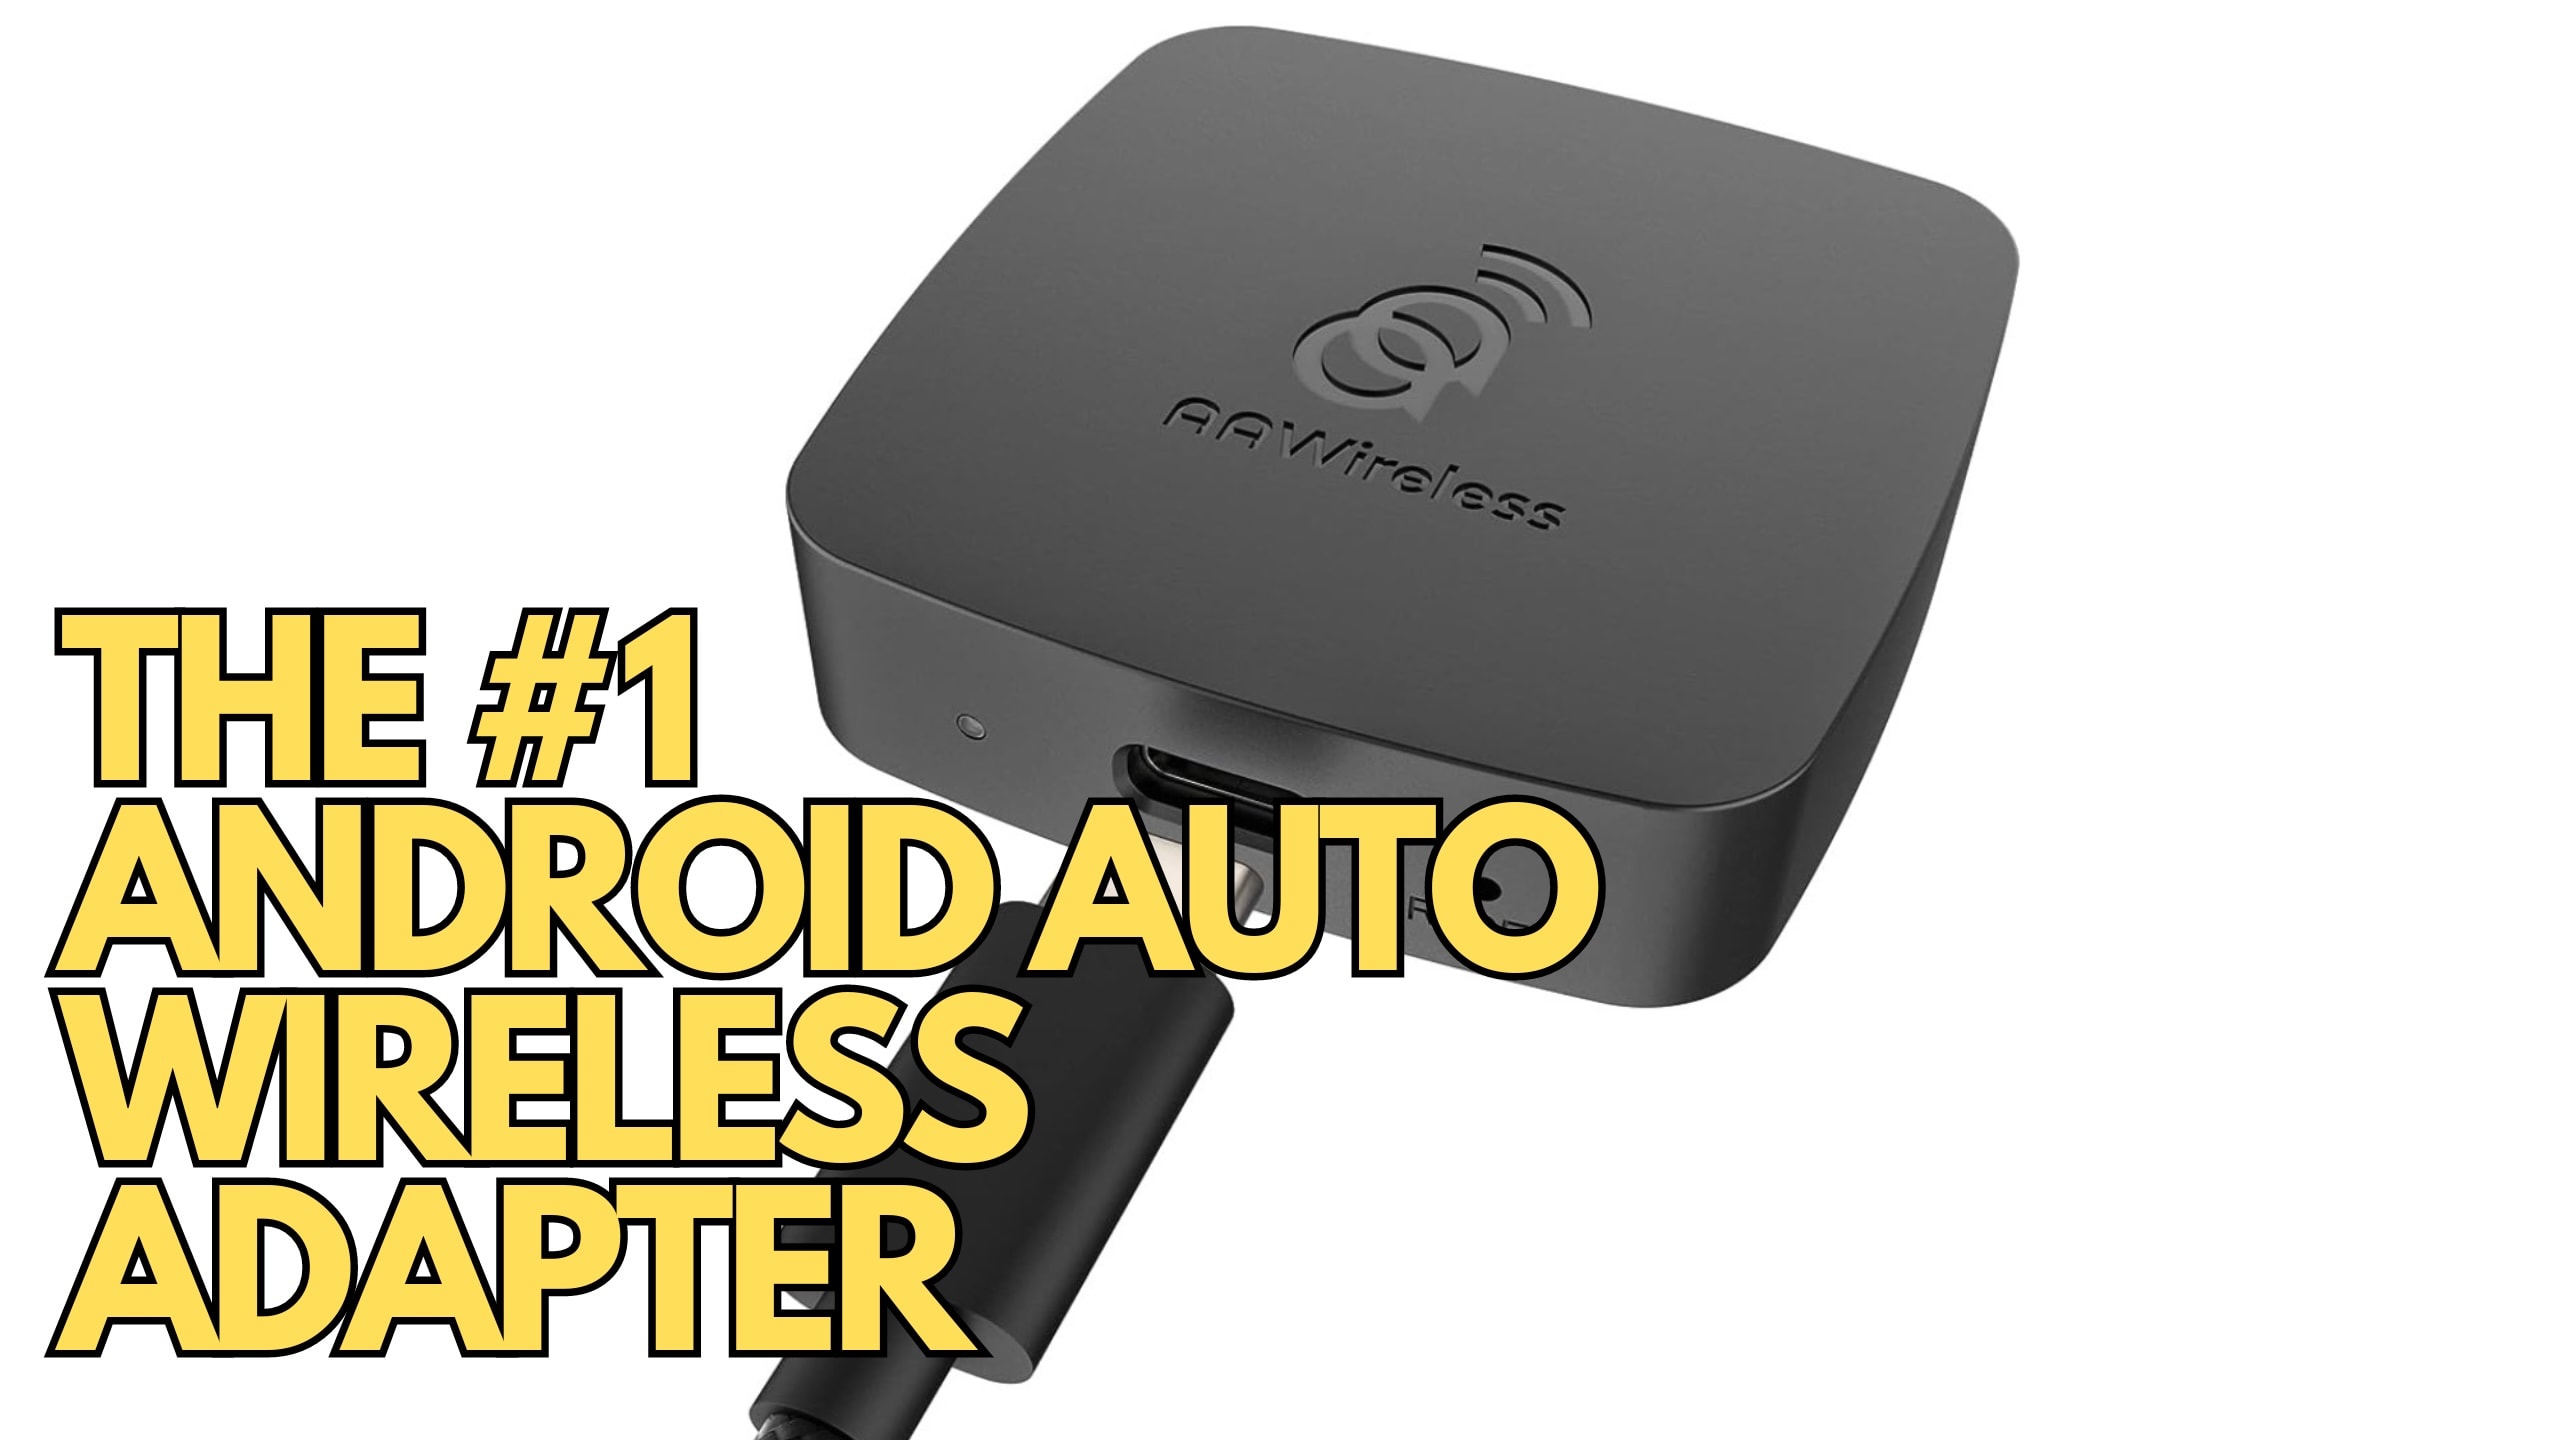 AA Wireless adapter that enables wireless Android Auto launches on